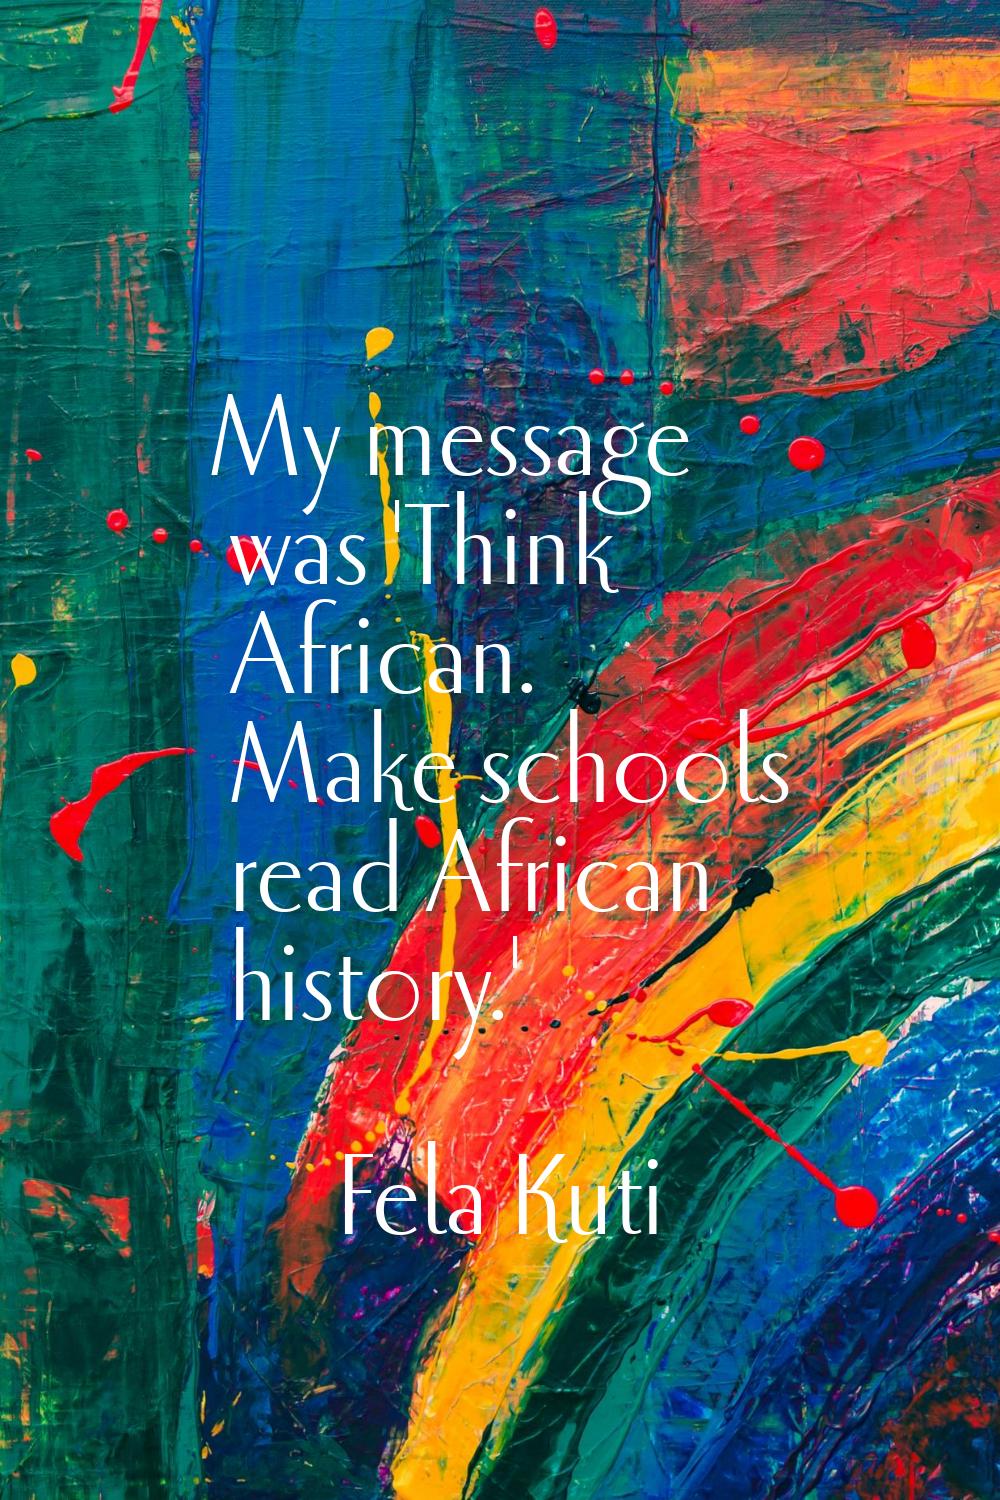 My message was 'Think African. Make schools read African history.'